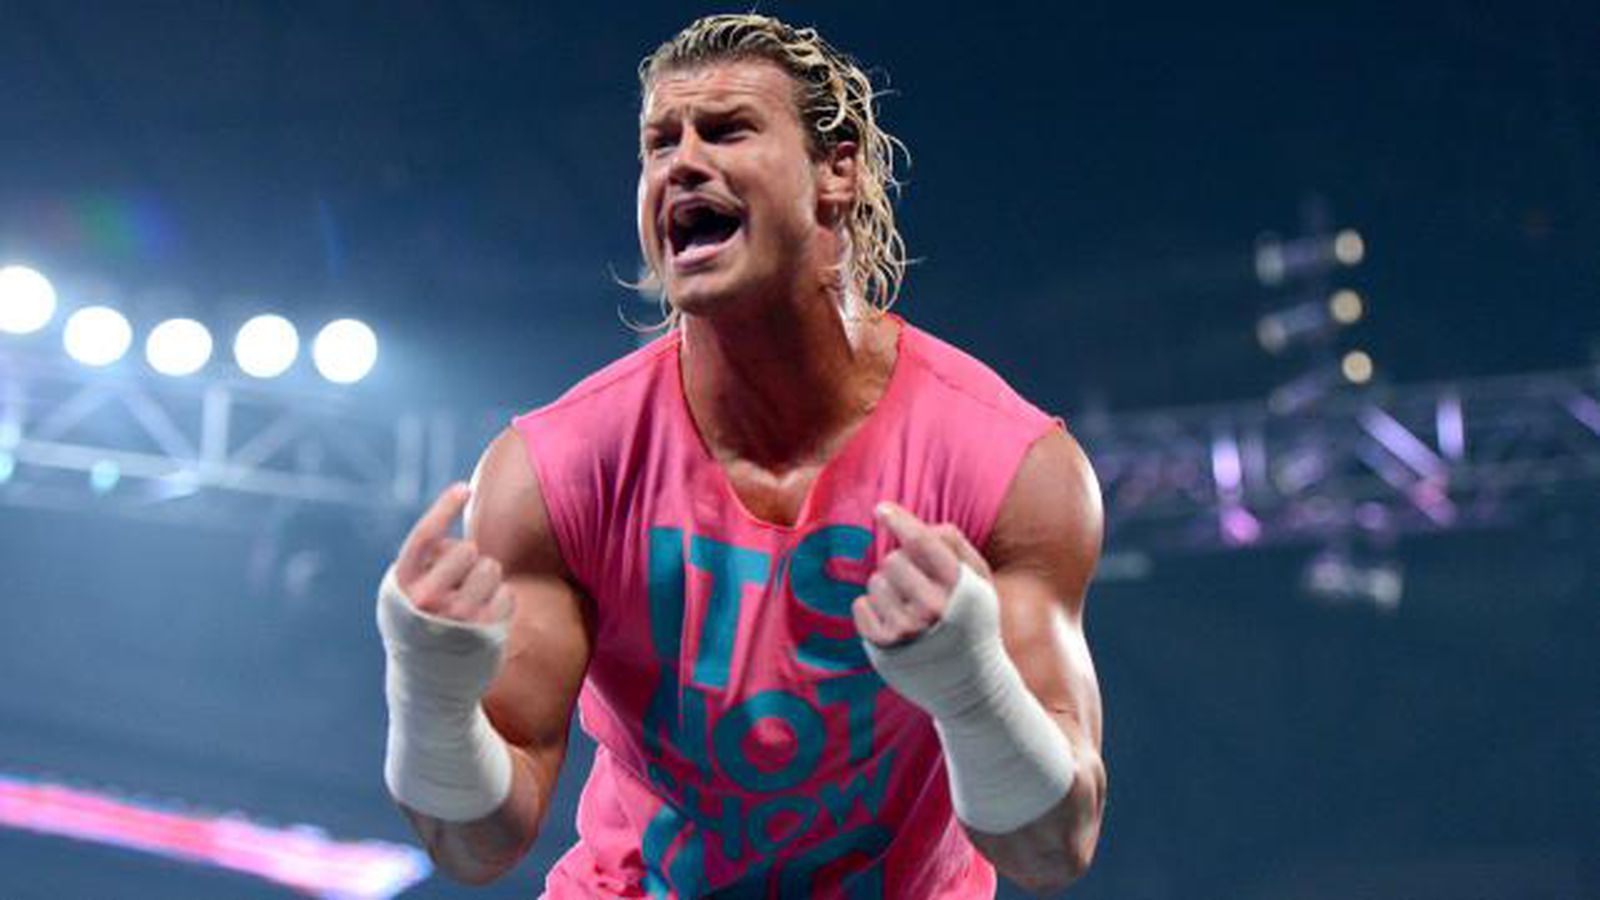 Ziggler has had one of the longest careers of stars on the current roster.